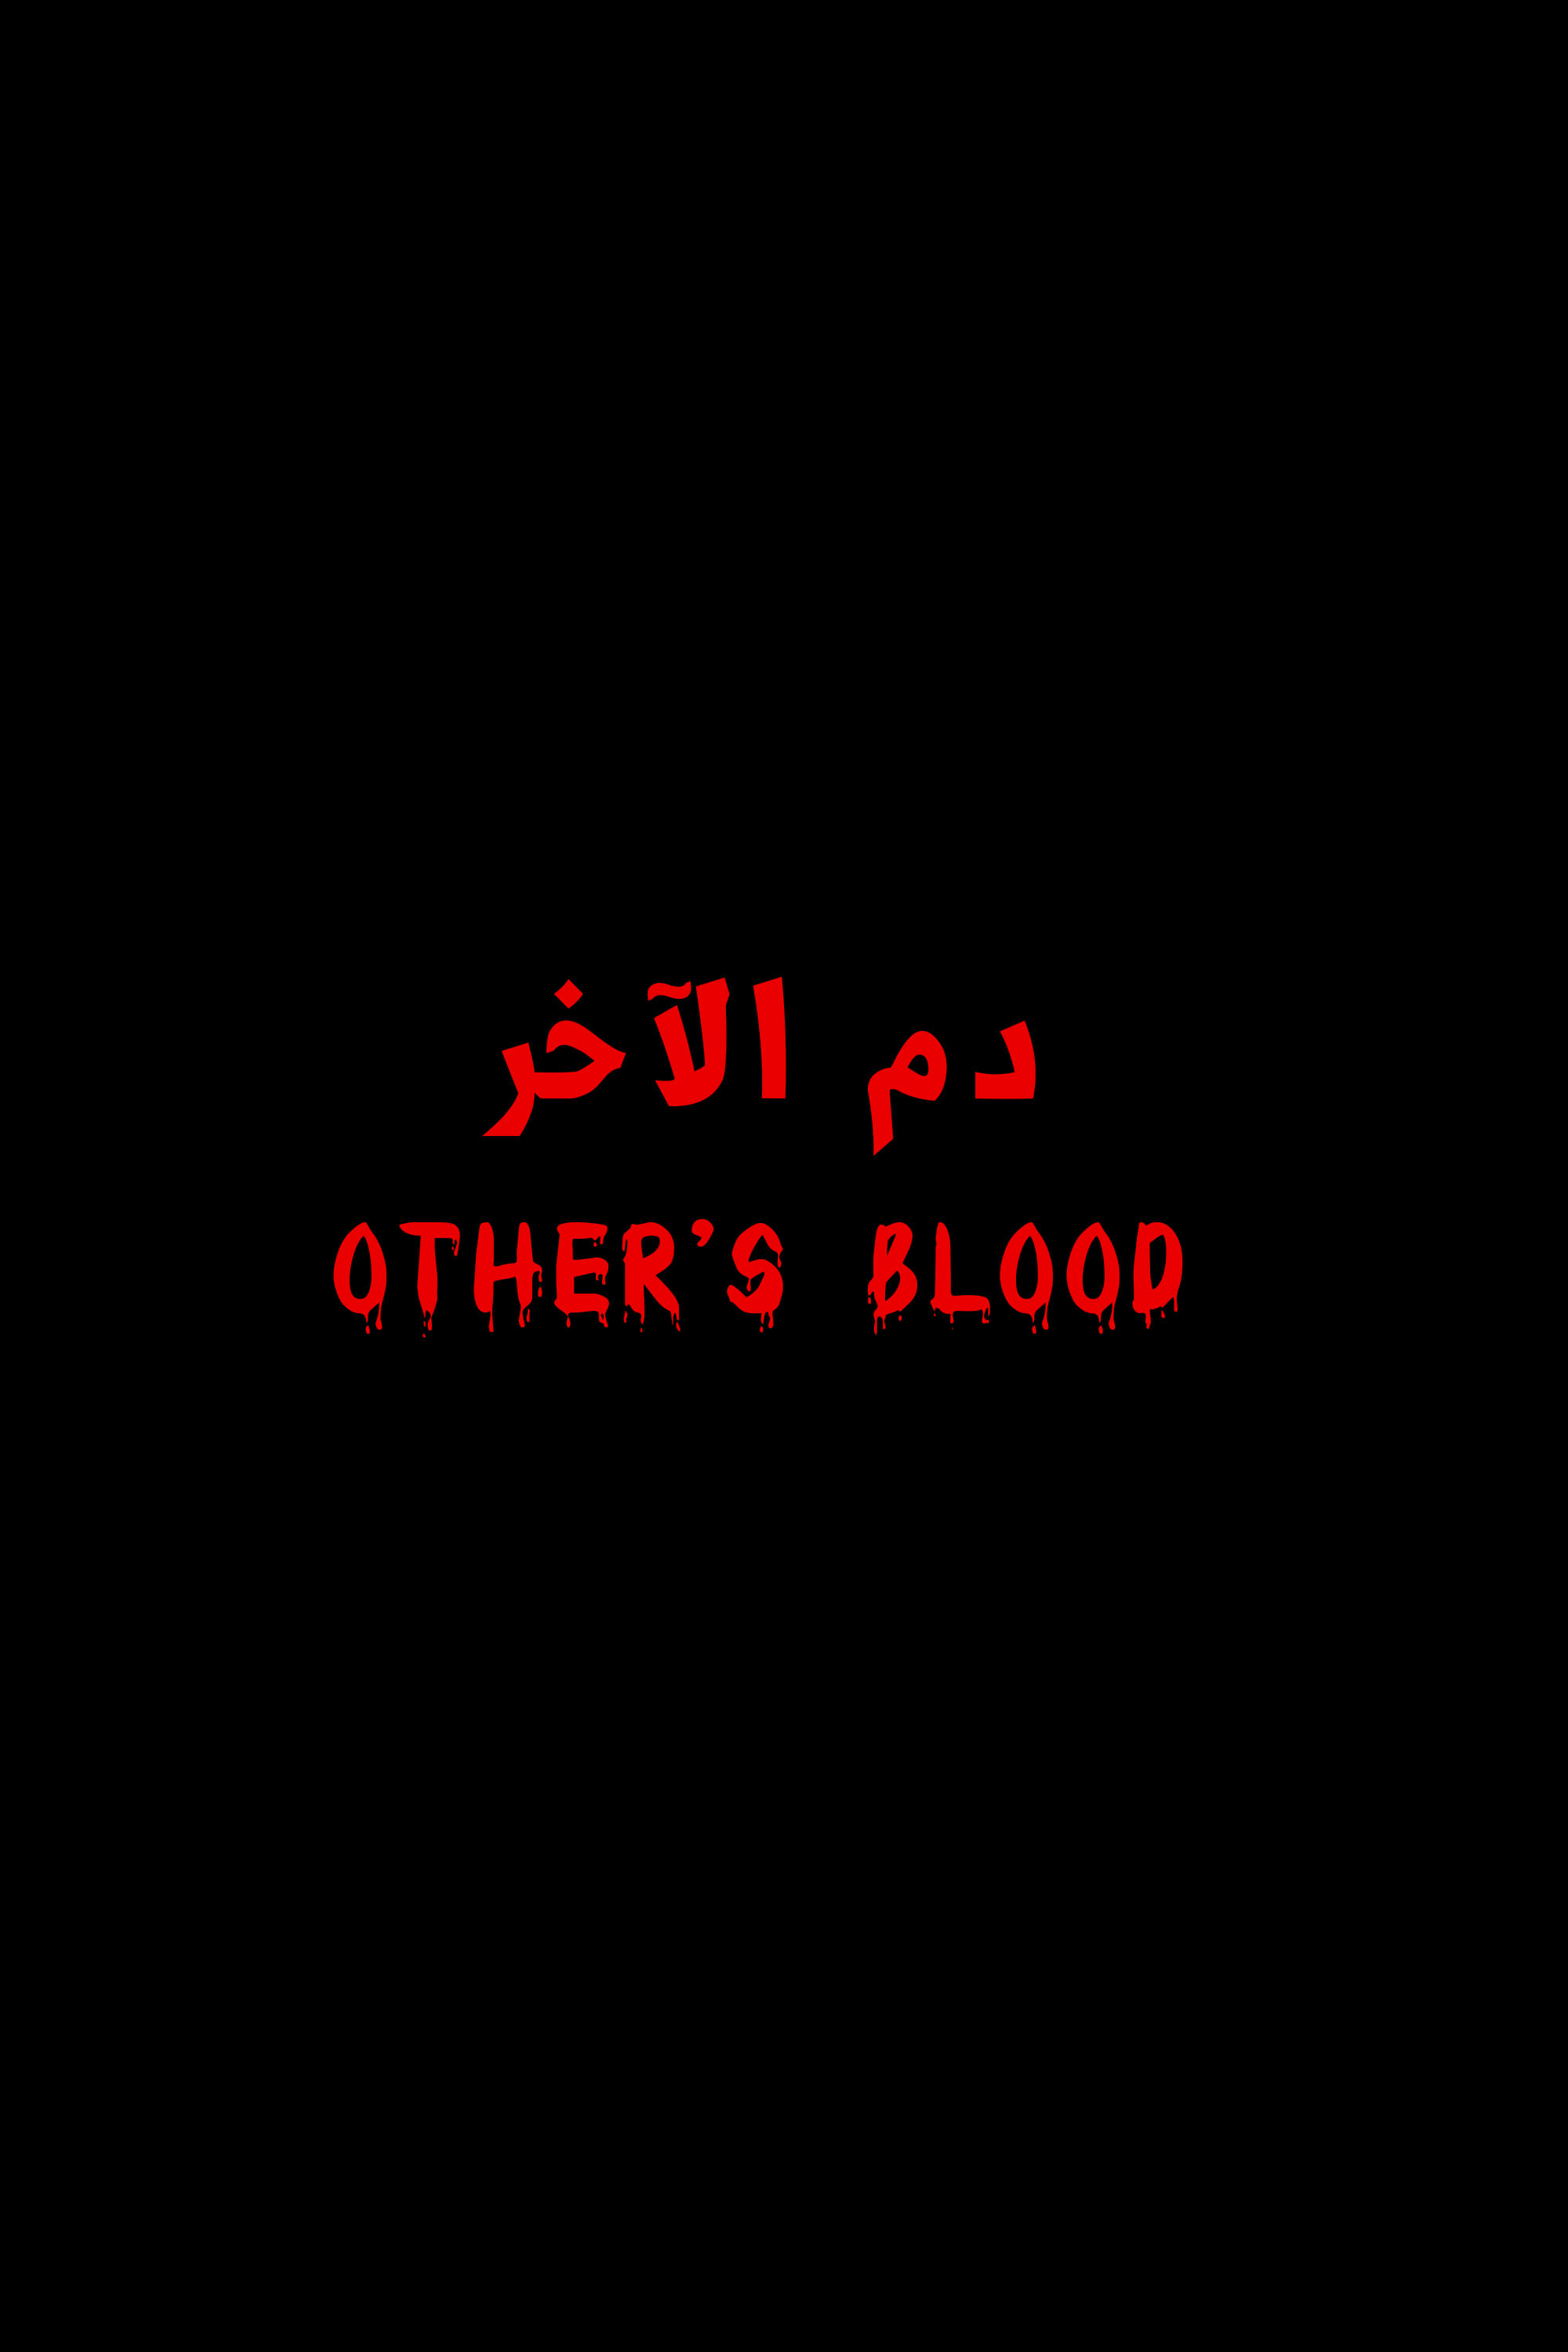 Other's Blood